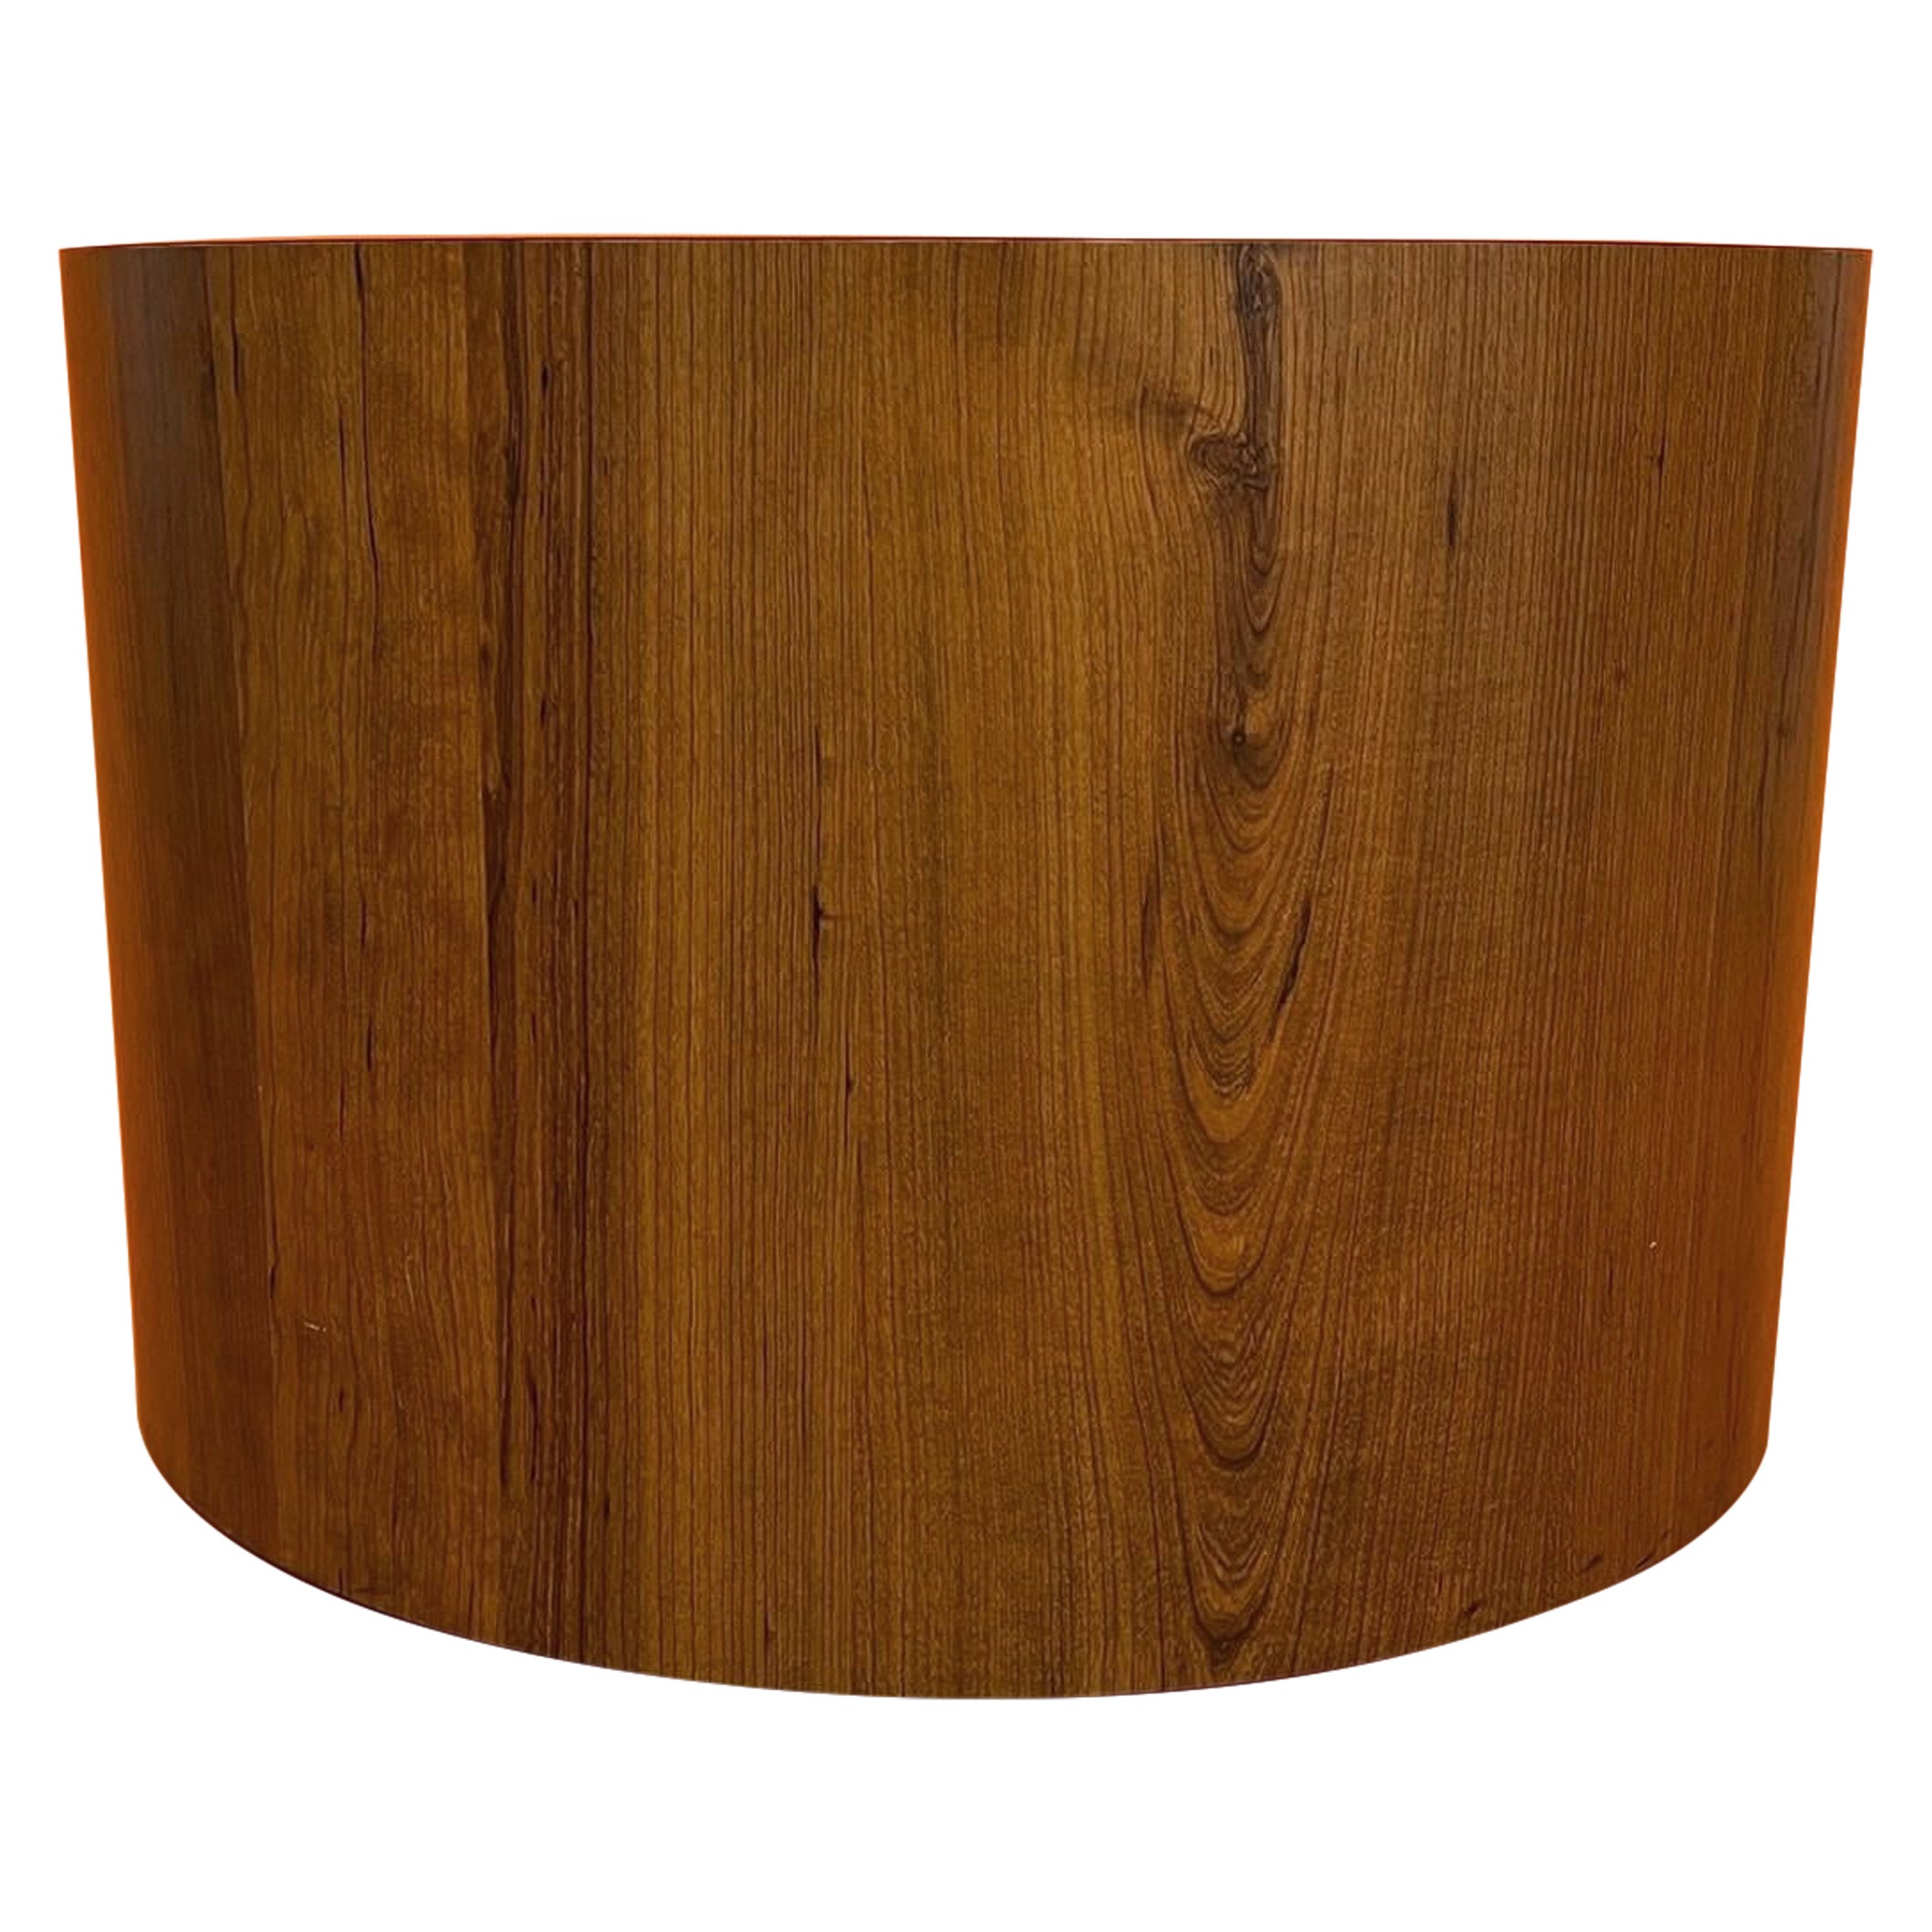 Midcentury Teak Circle Drum Shaped Coffee Table End Table 1970s circa For Sale